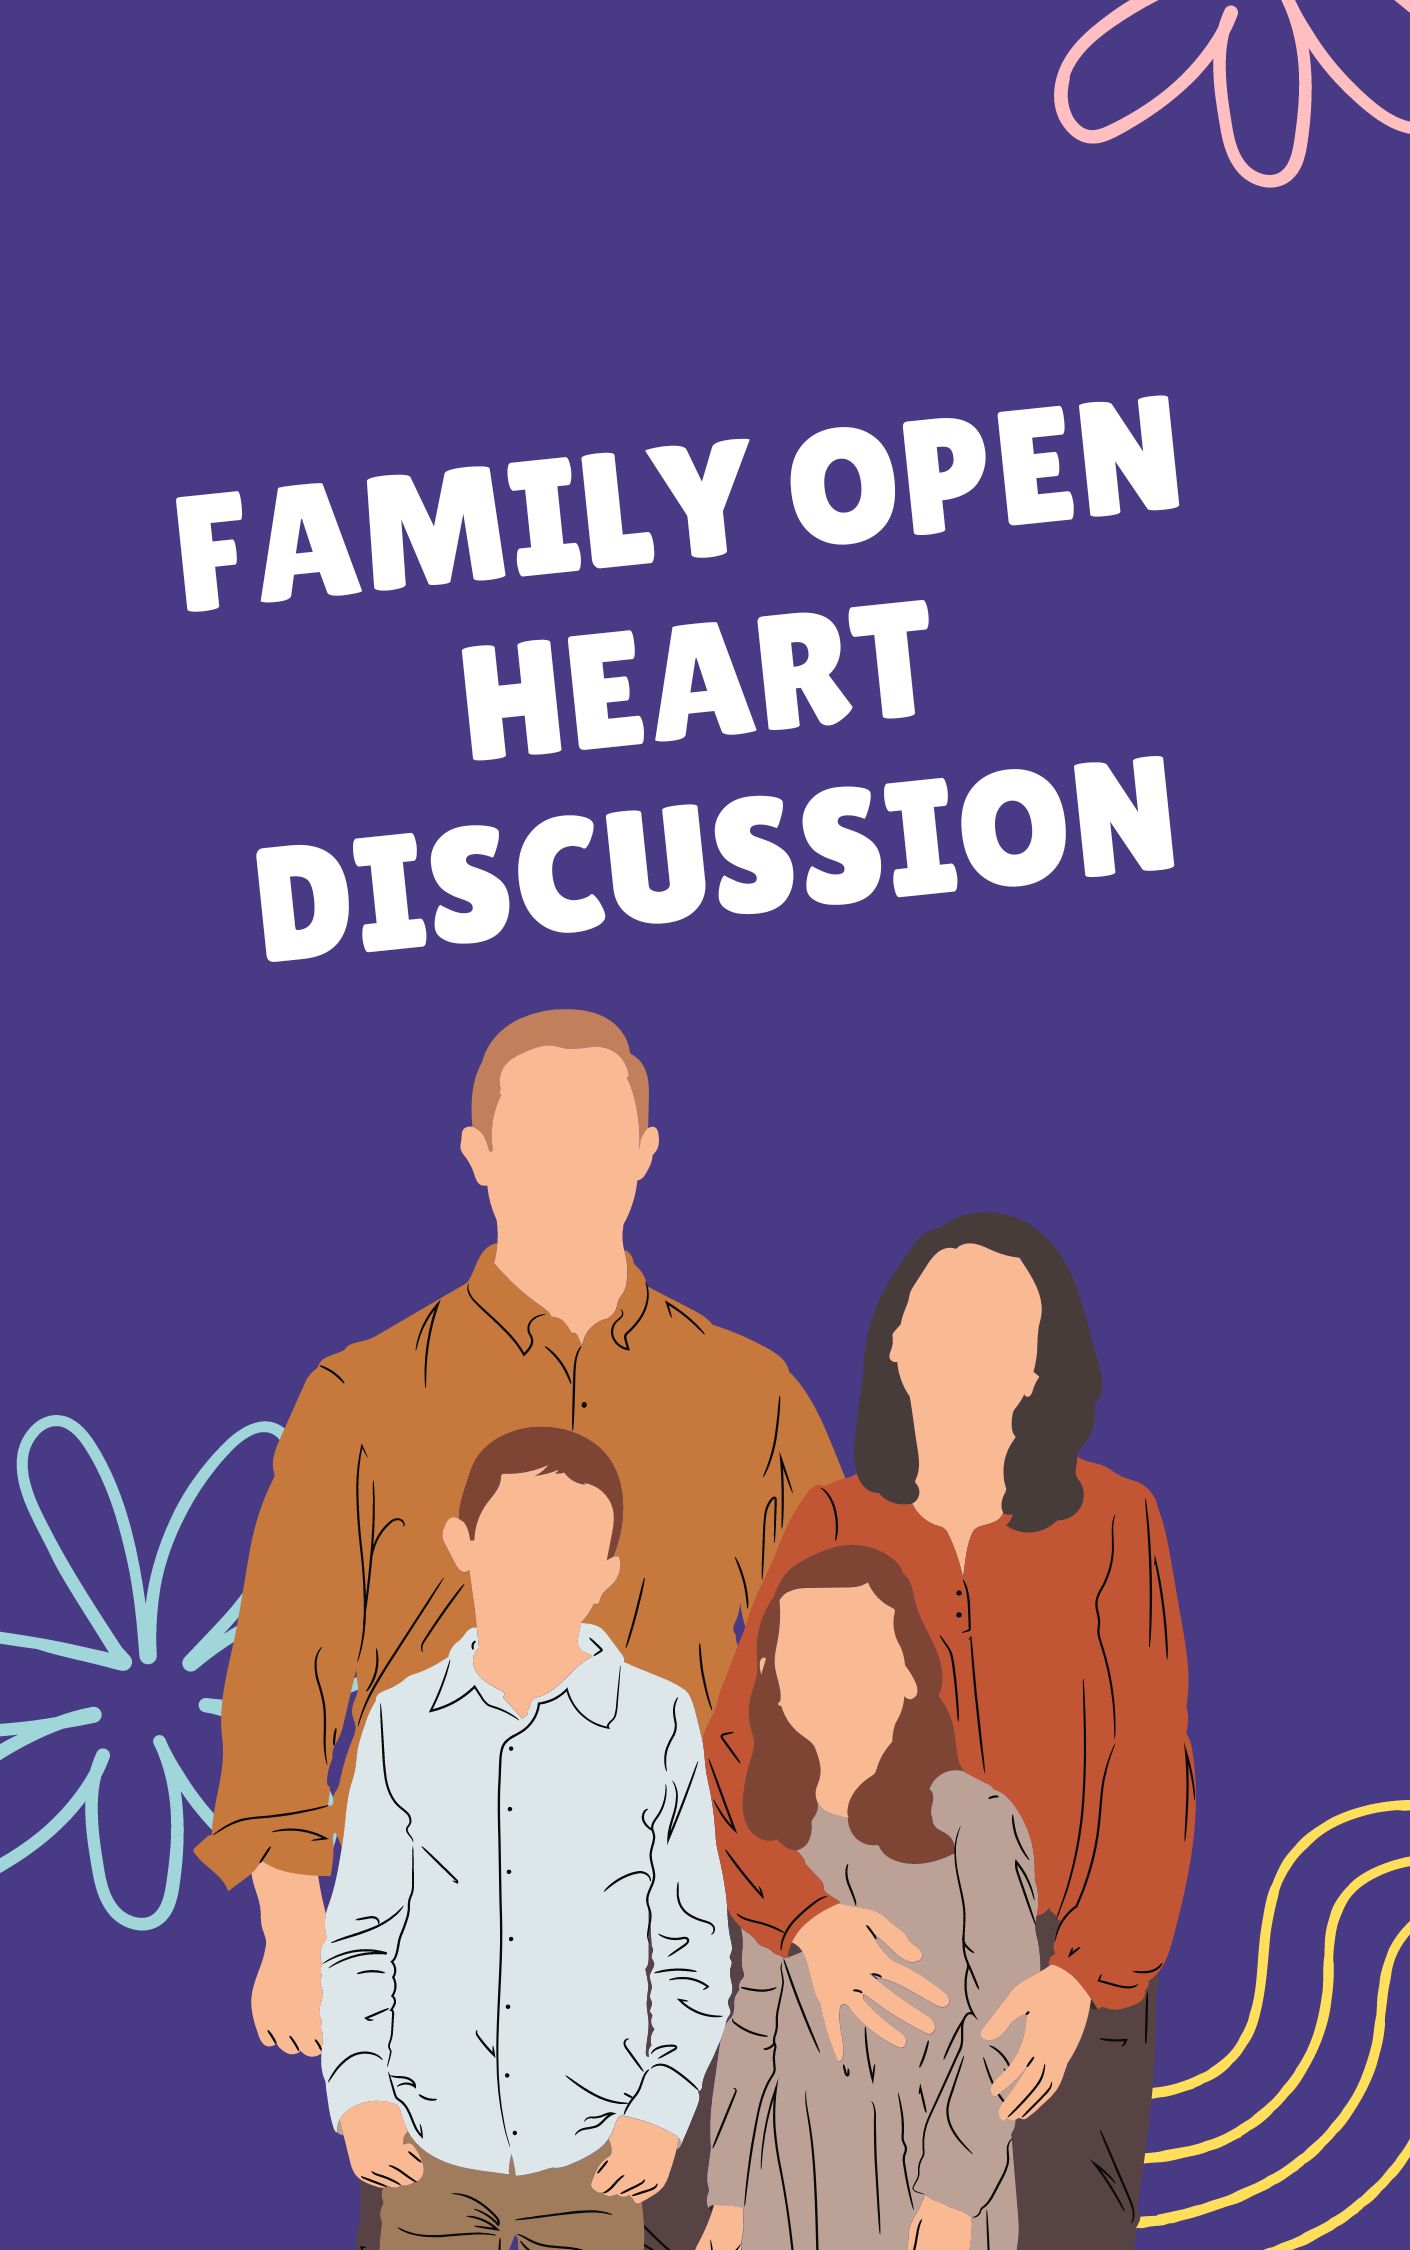 Couples open heart discussion guide